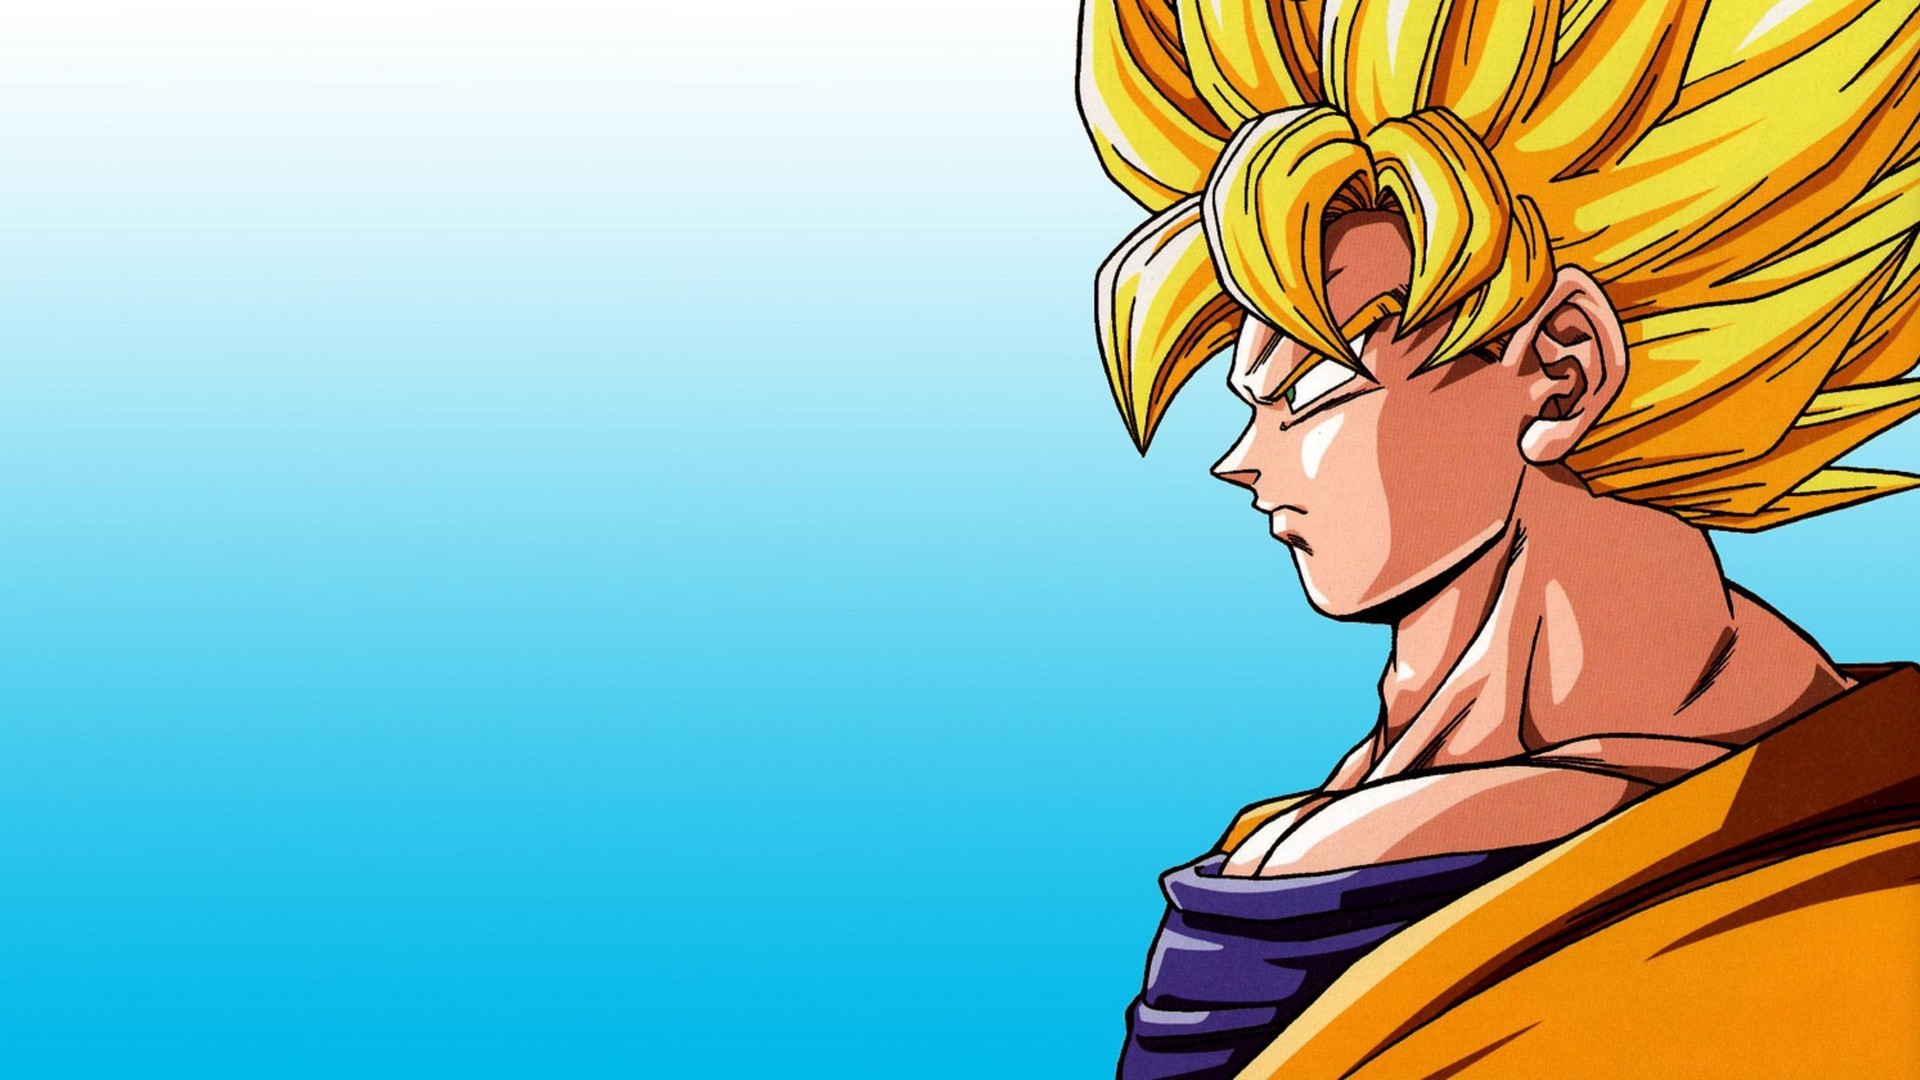 Wallpaper Goku Super Saiyan with resolution 1920X1080 pixel. You can use this wallpaper as background for your desktop Computer Screensavers, Android or iPhone smartphones